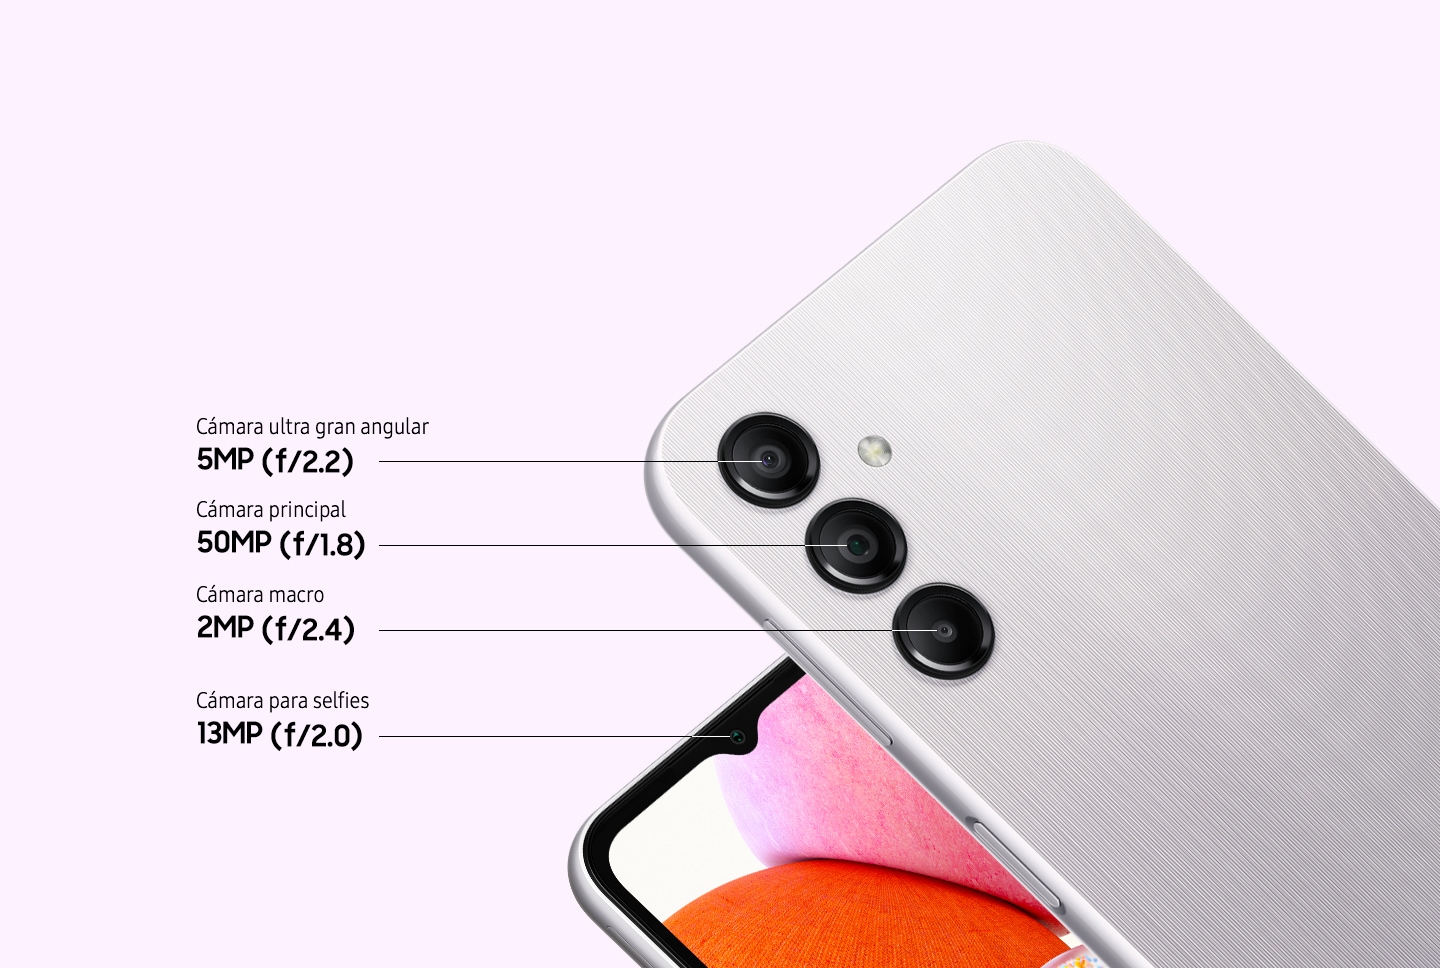 Two devices, both in Silver, show the rear side and front side of the device. On the right, the rear side of the device shows the 5MP f2.2 Ultra-wide camera, 50MP f1.8 Main camera, and 2MP f2.4 Macro camera. On the left, the front side of the device shows the 13MP f2.0 Front camera.